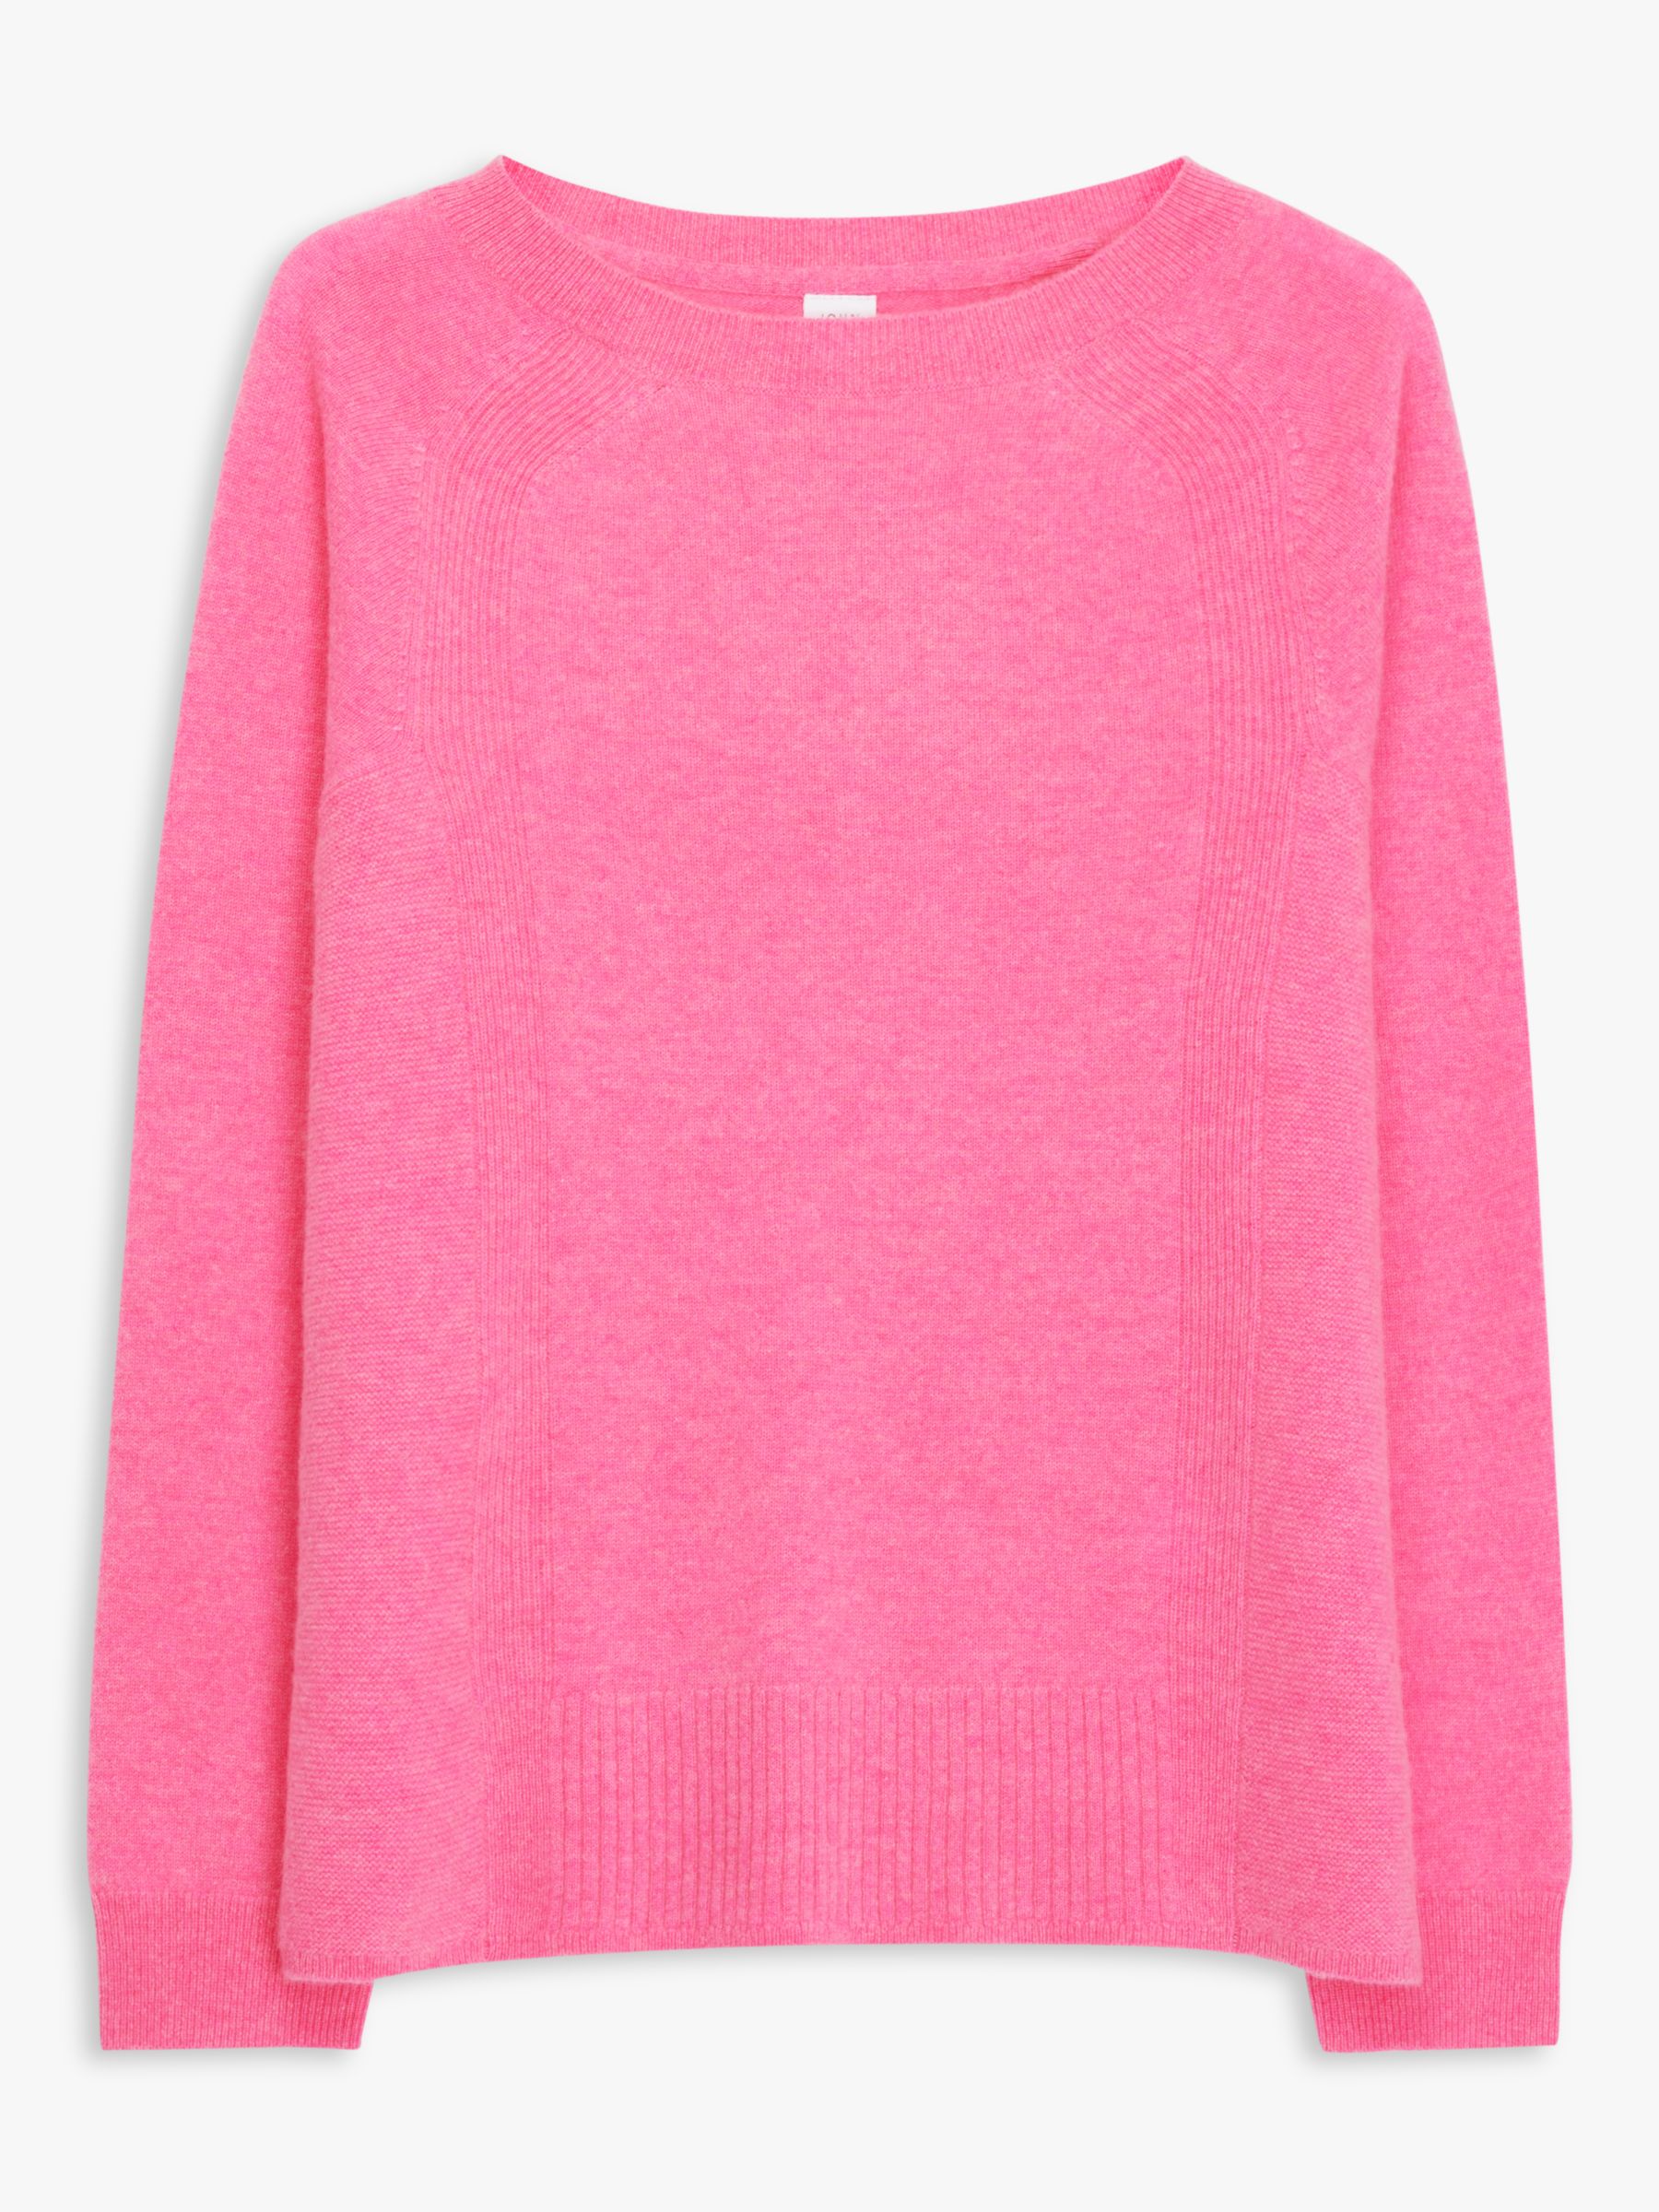 John Lewis Relaxed Cashmere Boat Neck Jumper